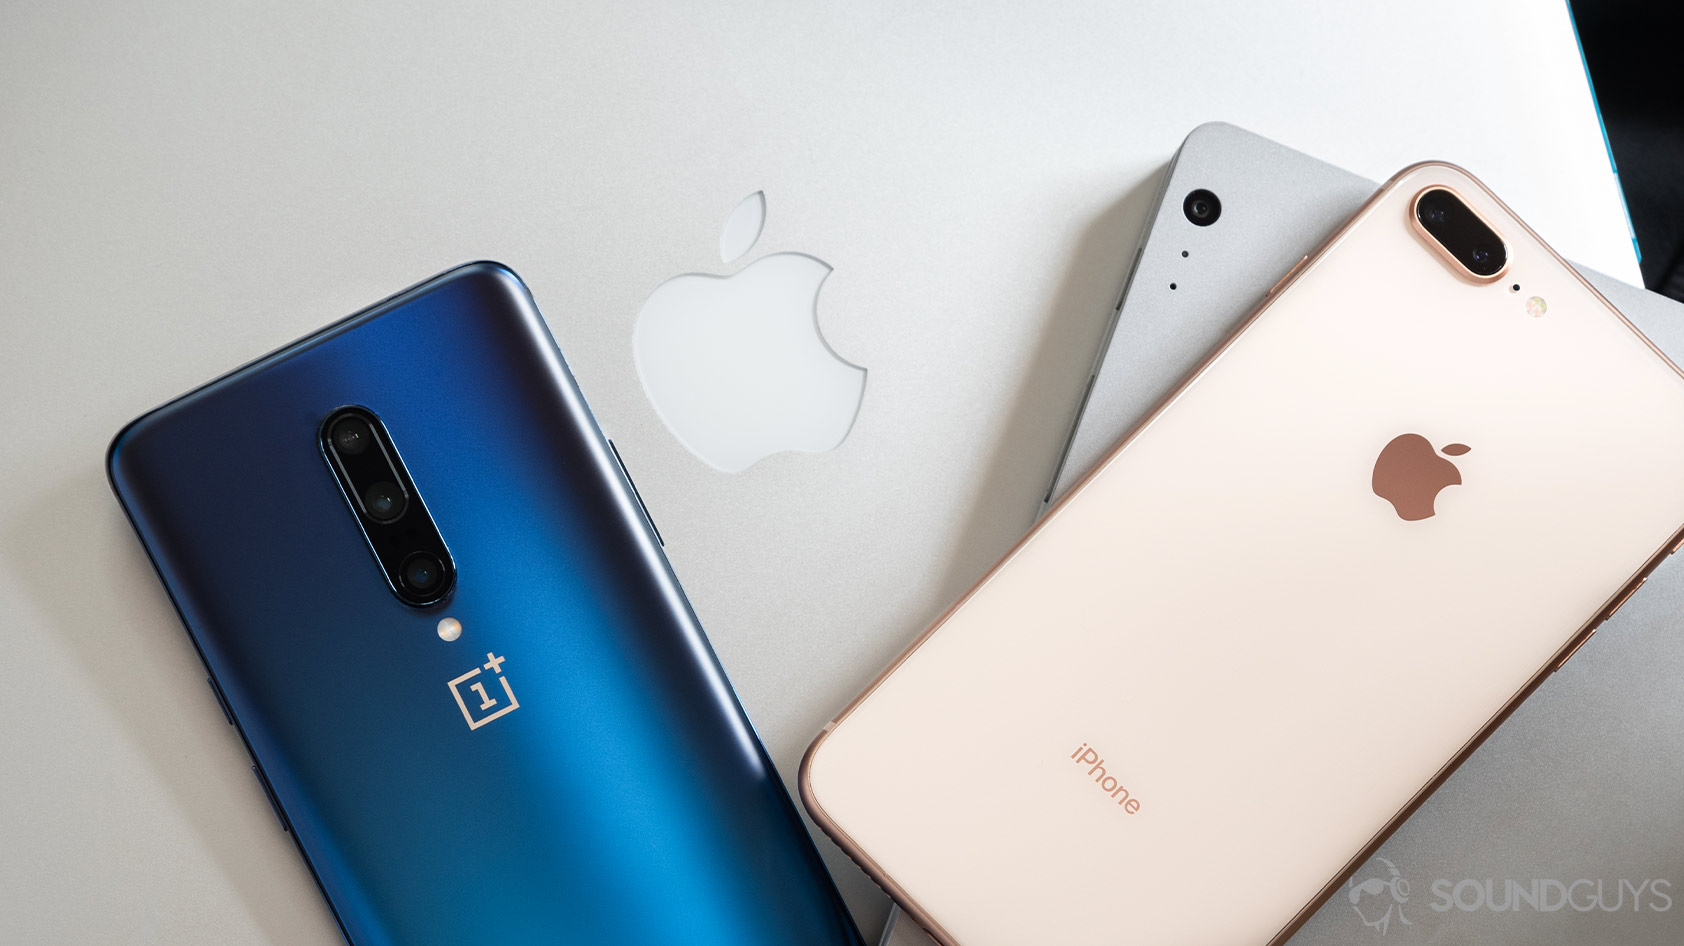 A OnePlus 7 Pro, iPhone 7 Plus, Macbook Pro, and Surface Book Pro all stacked on top of each other to demonstrate how to use Bluetooth across a range of devices.